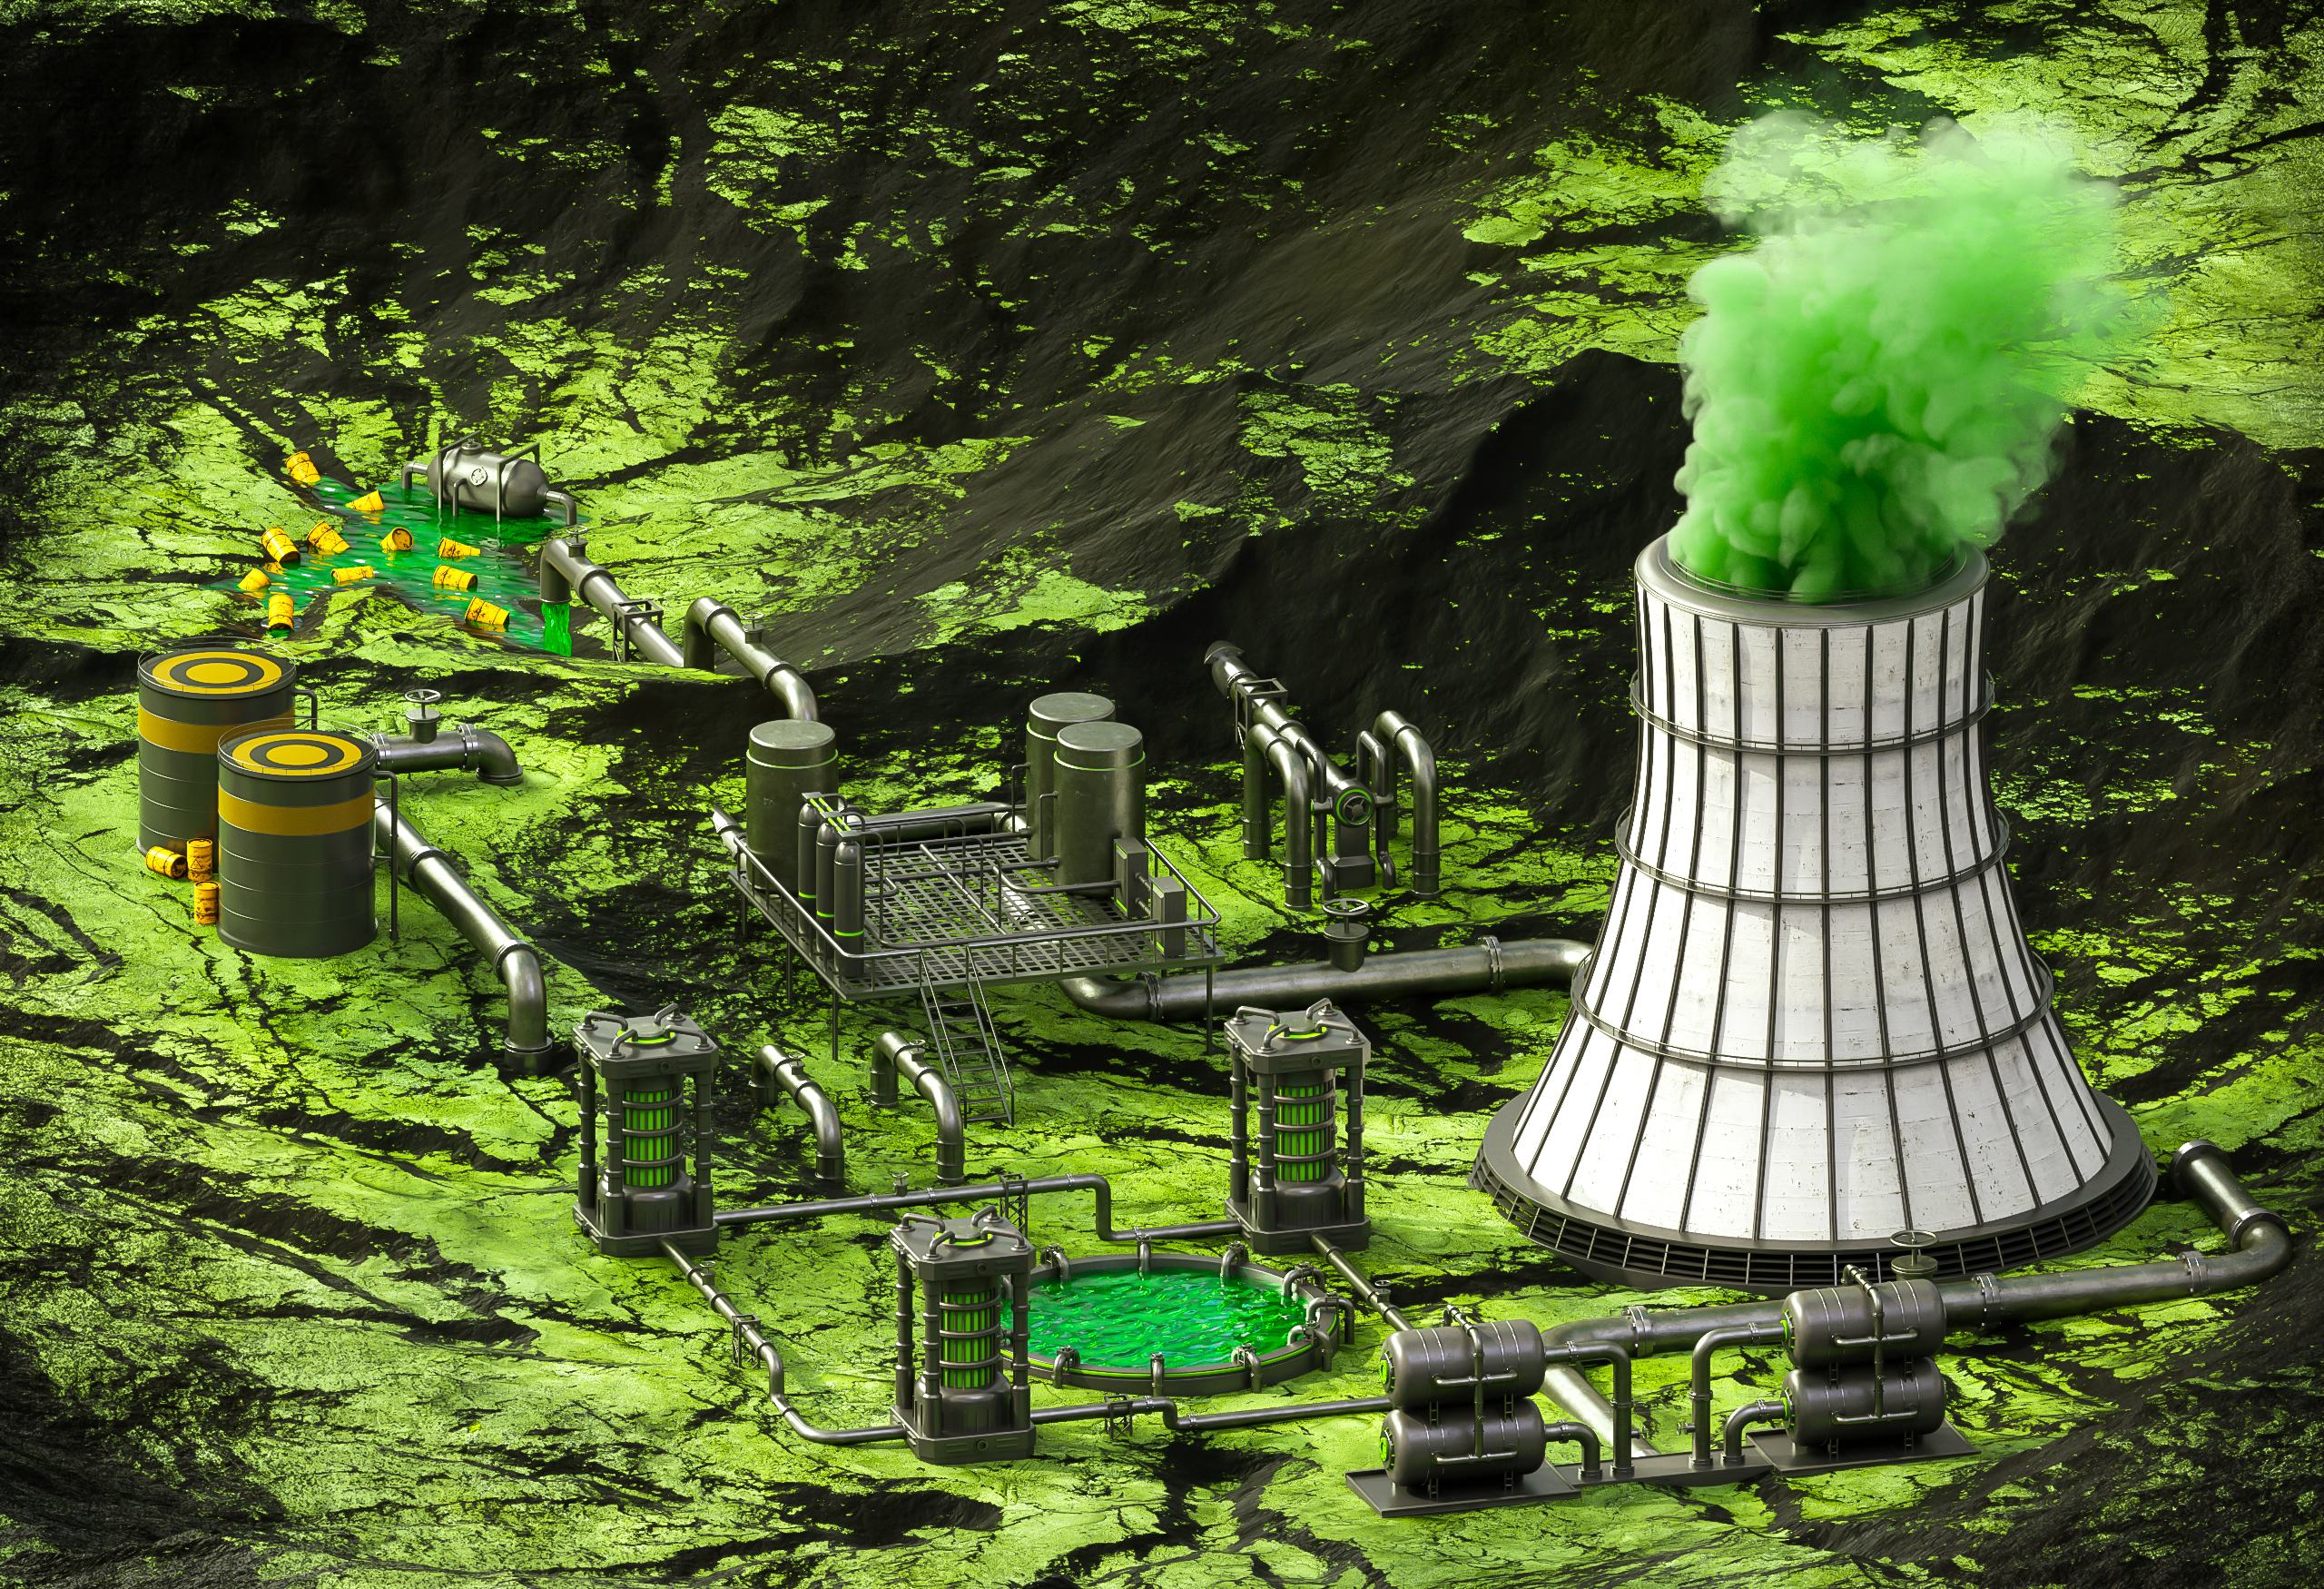 General 2560x1750 toxic green smoke factory tubes detailed nuclear pollution reflection landscape contrast isometric abstract Alex Agreto digital art factories CGI